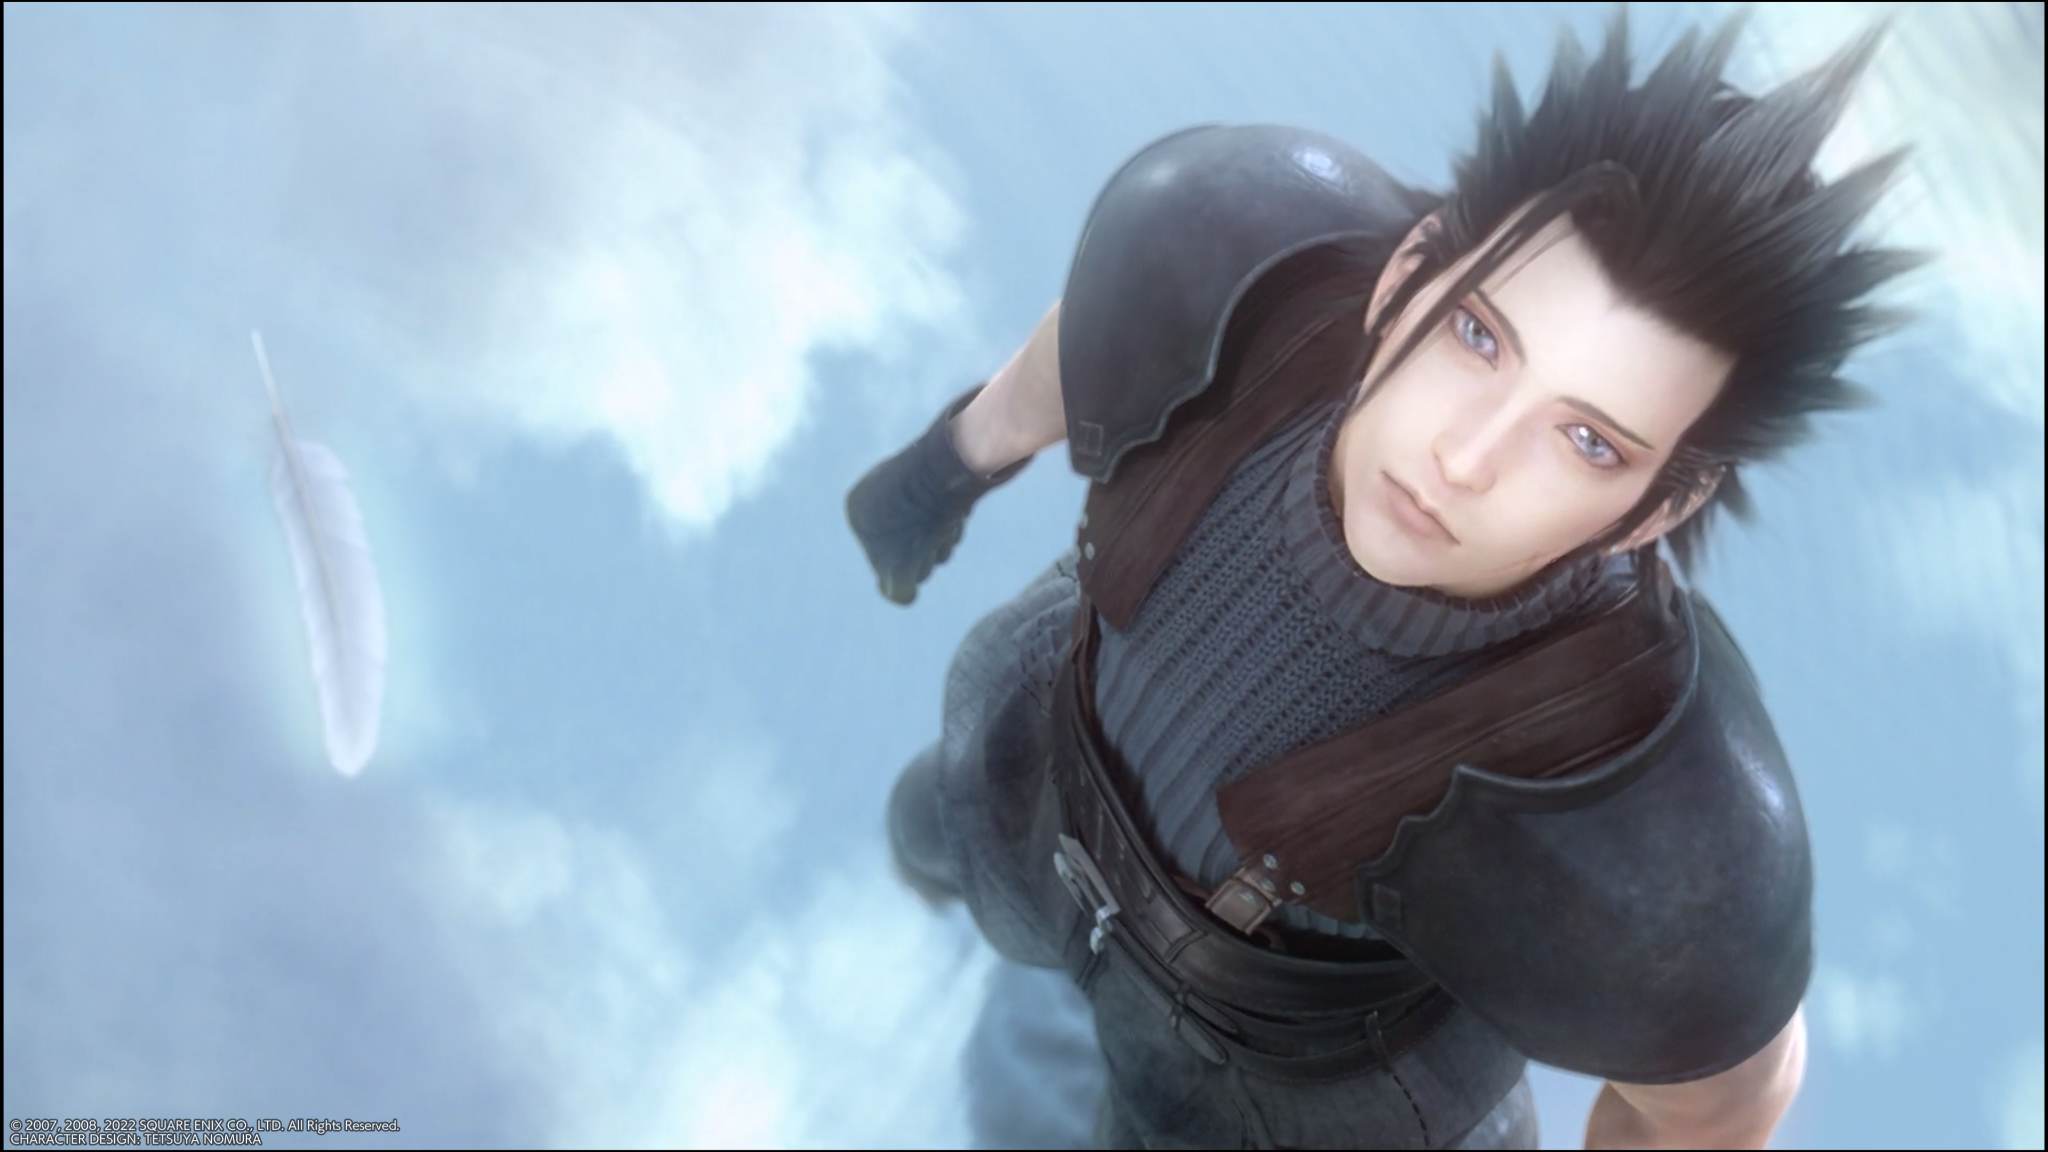 3 reasons why 'Crisis Core: Final Fantasy VII Reunion' is a must-play